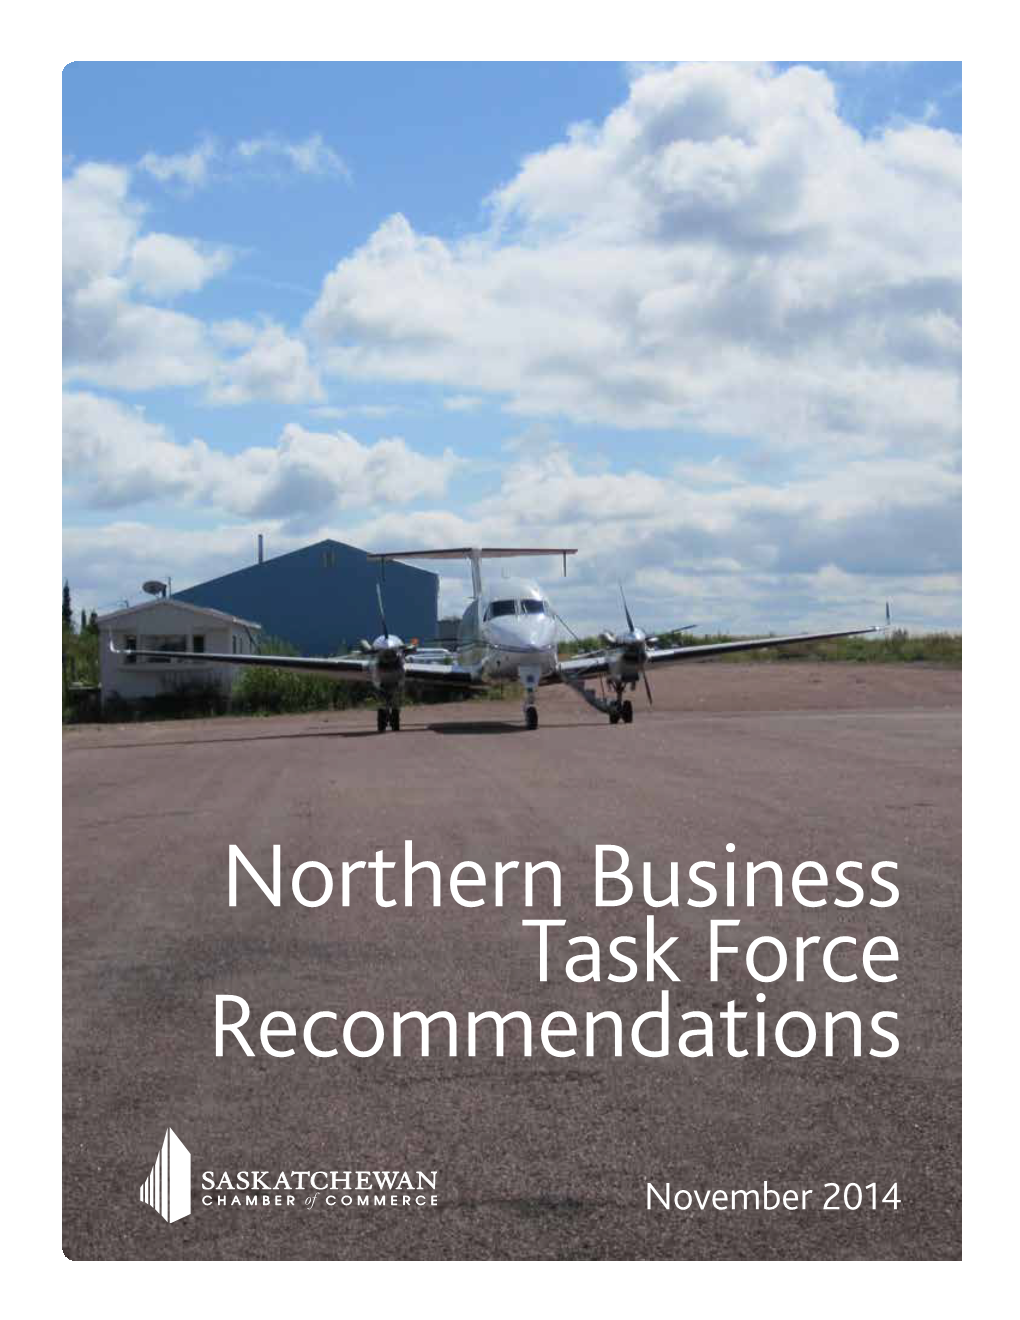 Northern Business Task Force Recommendations